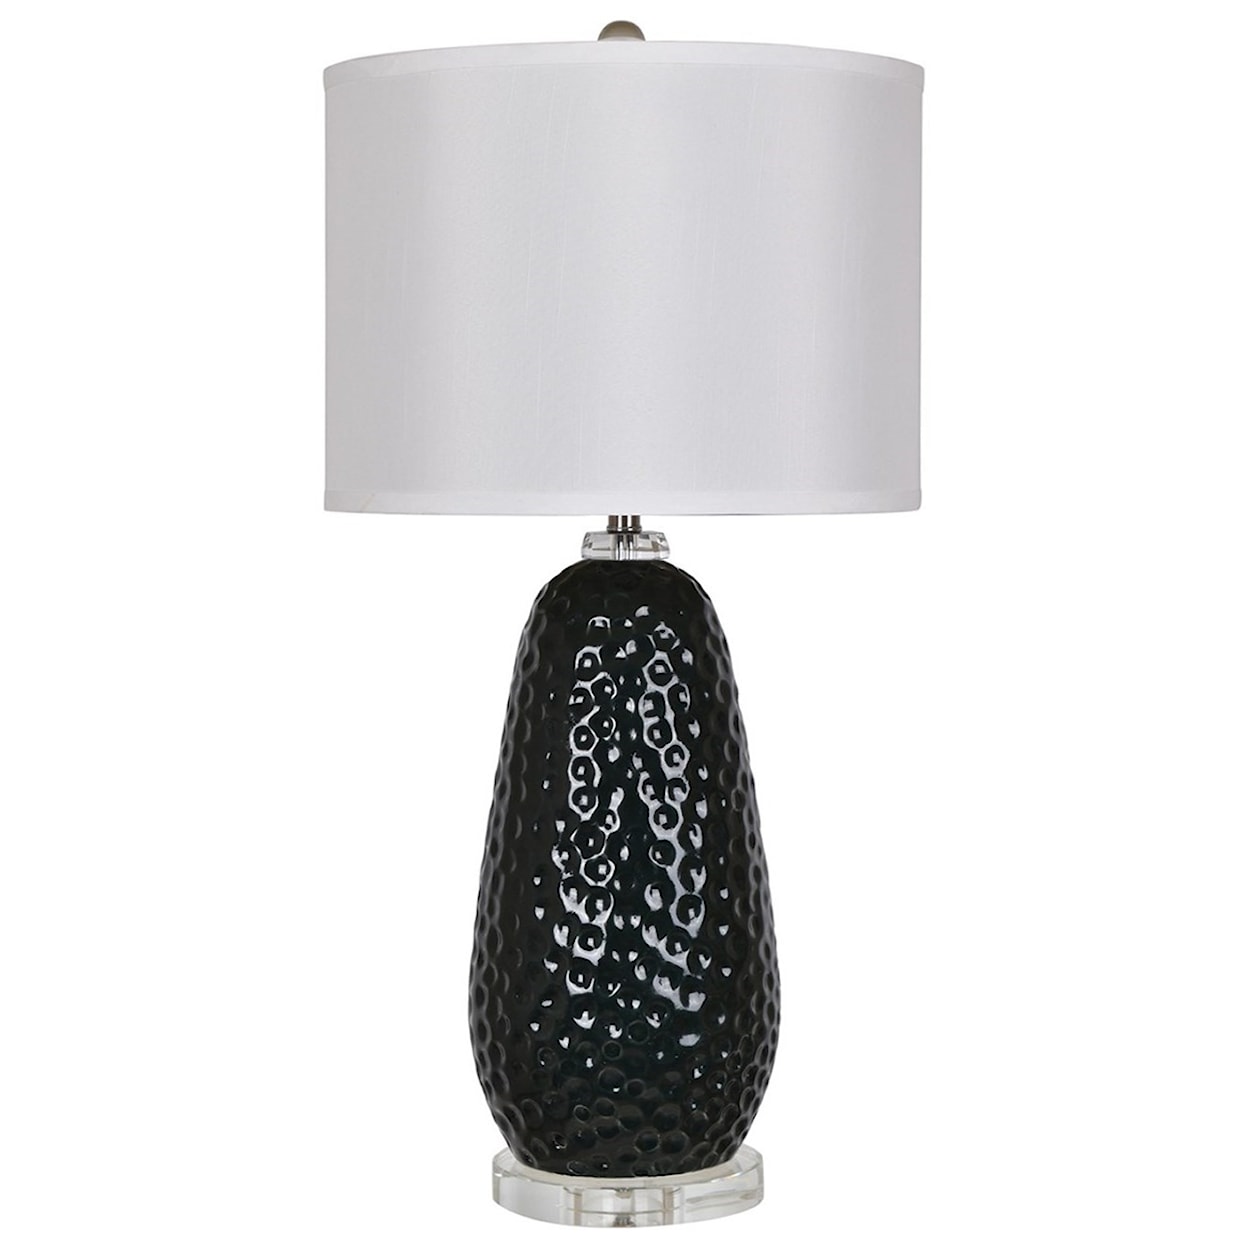 Crestview Collection Lighting Darcy Table Lamp